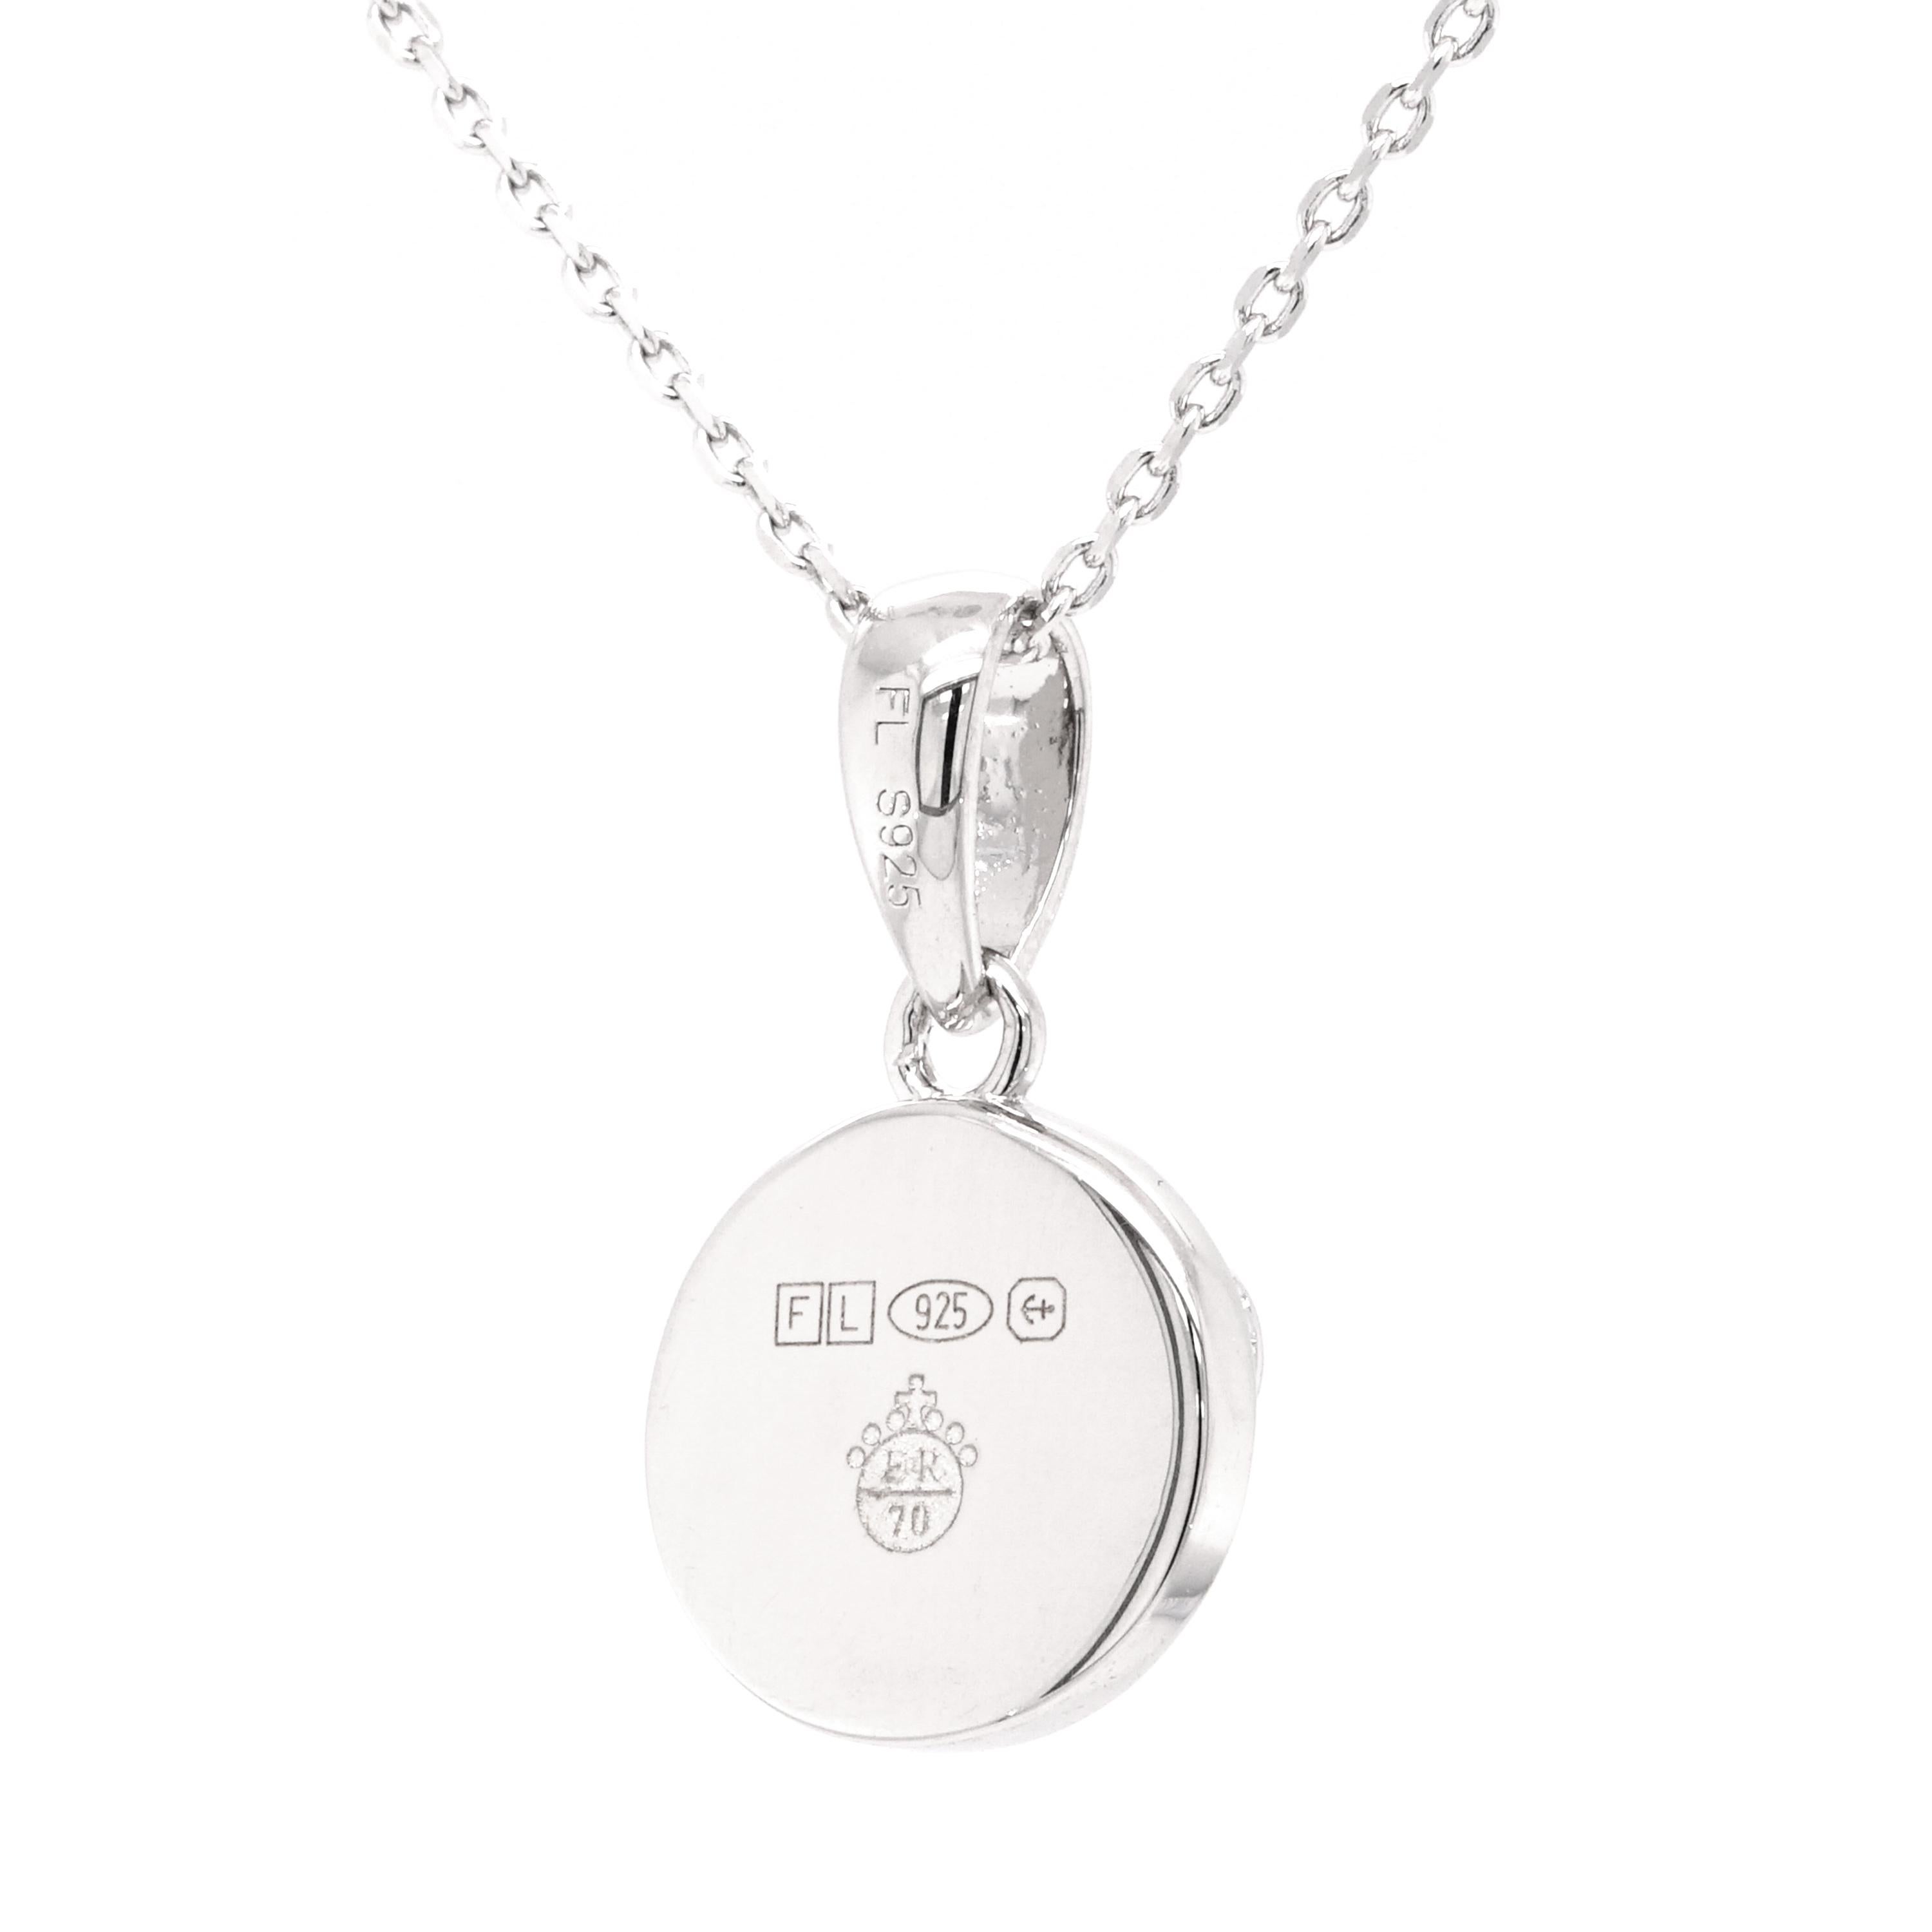 Top off a milestone of yours or a loved one with the Crown pendant. This sterling silver pendant honours Her Majesty Queen Elizabeth for her unwavering dedication to service and for being a comforting leader to so many. Ever thankful for The Queen’s